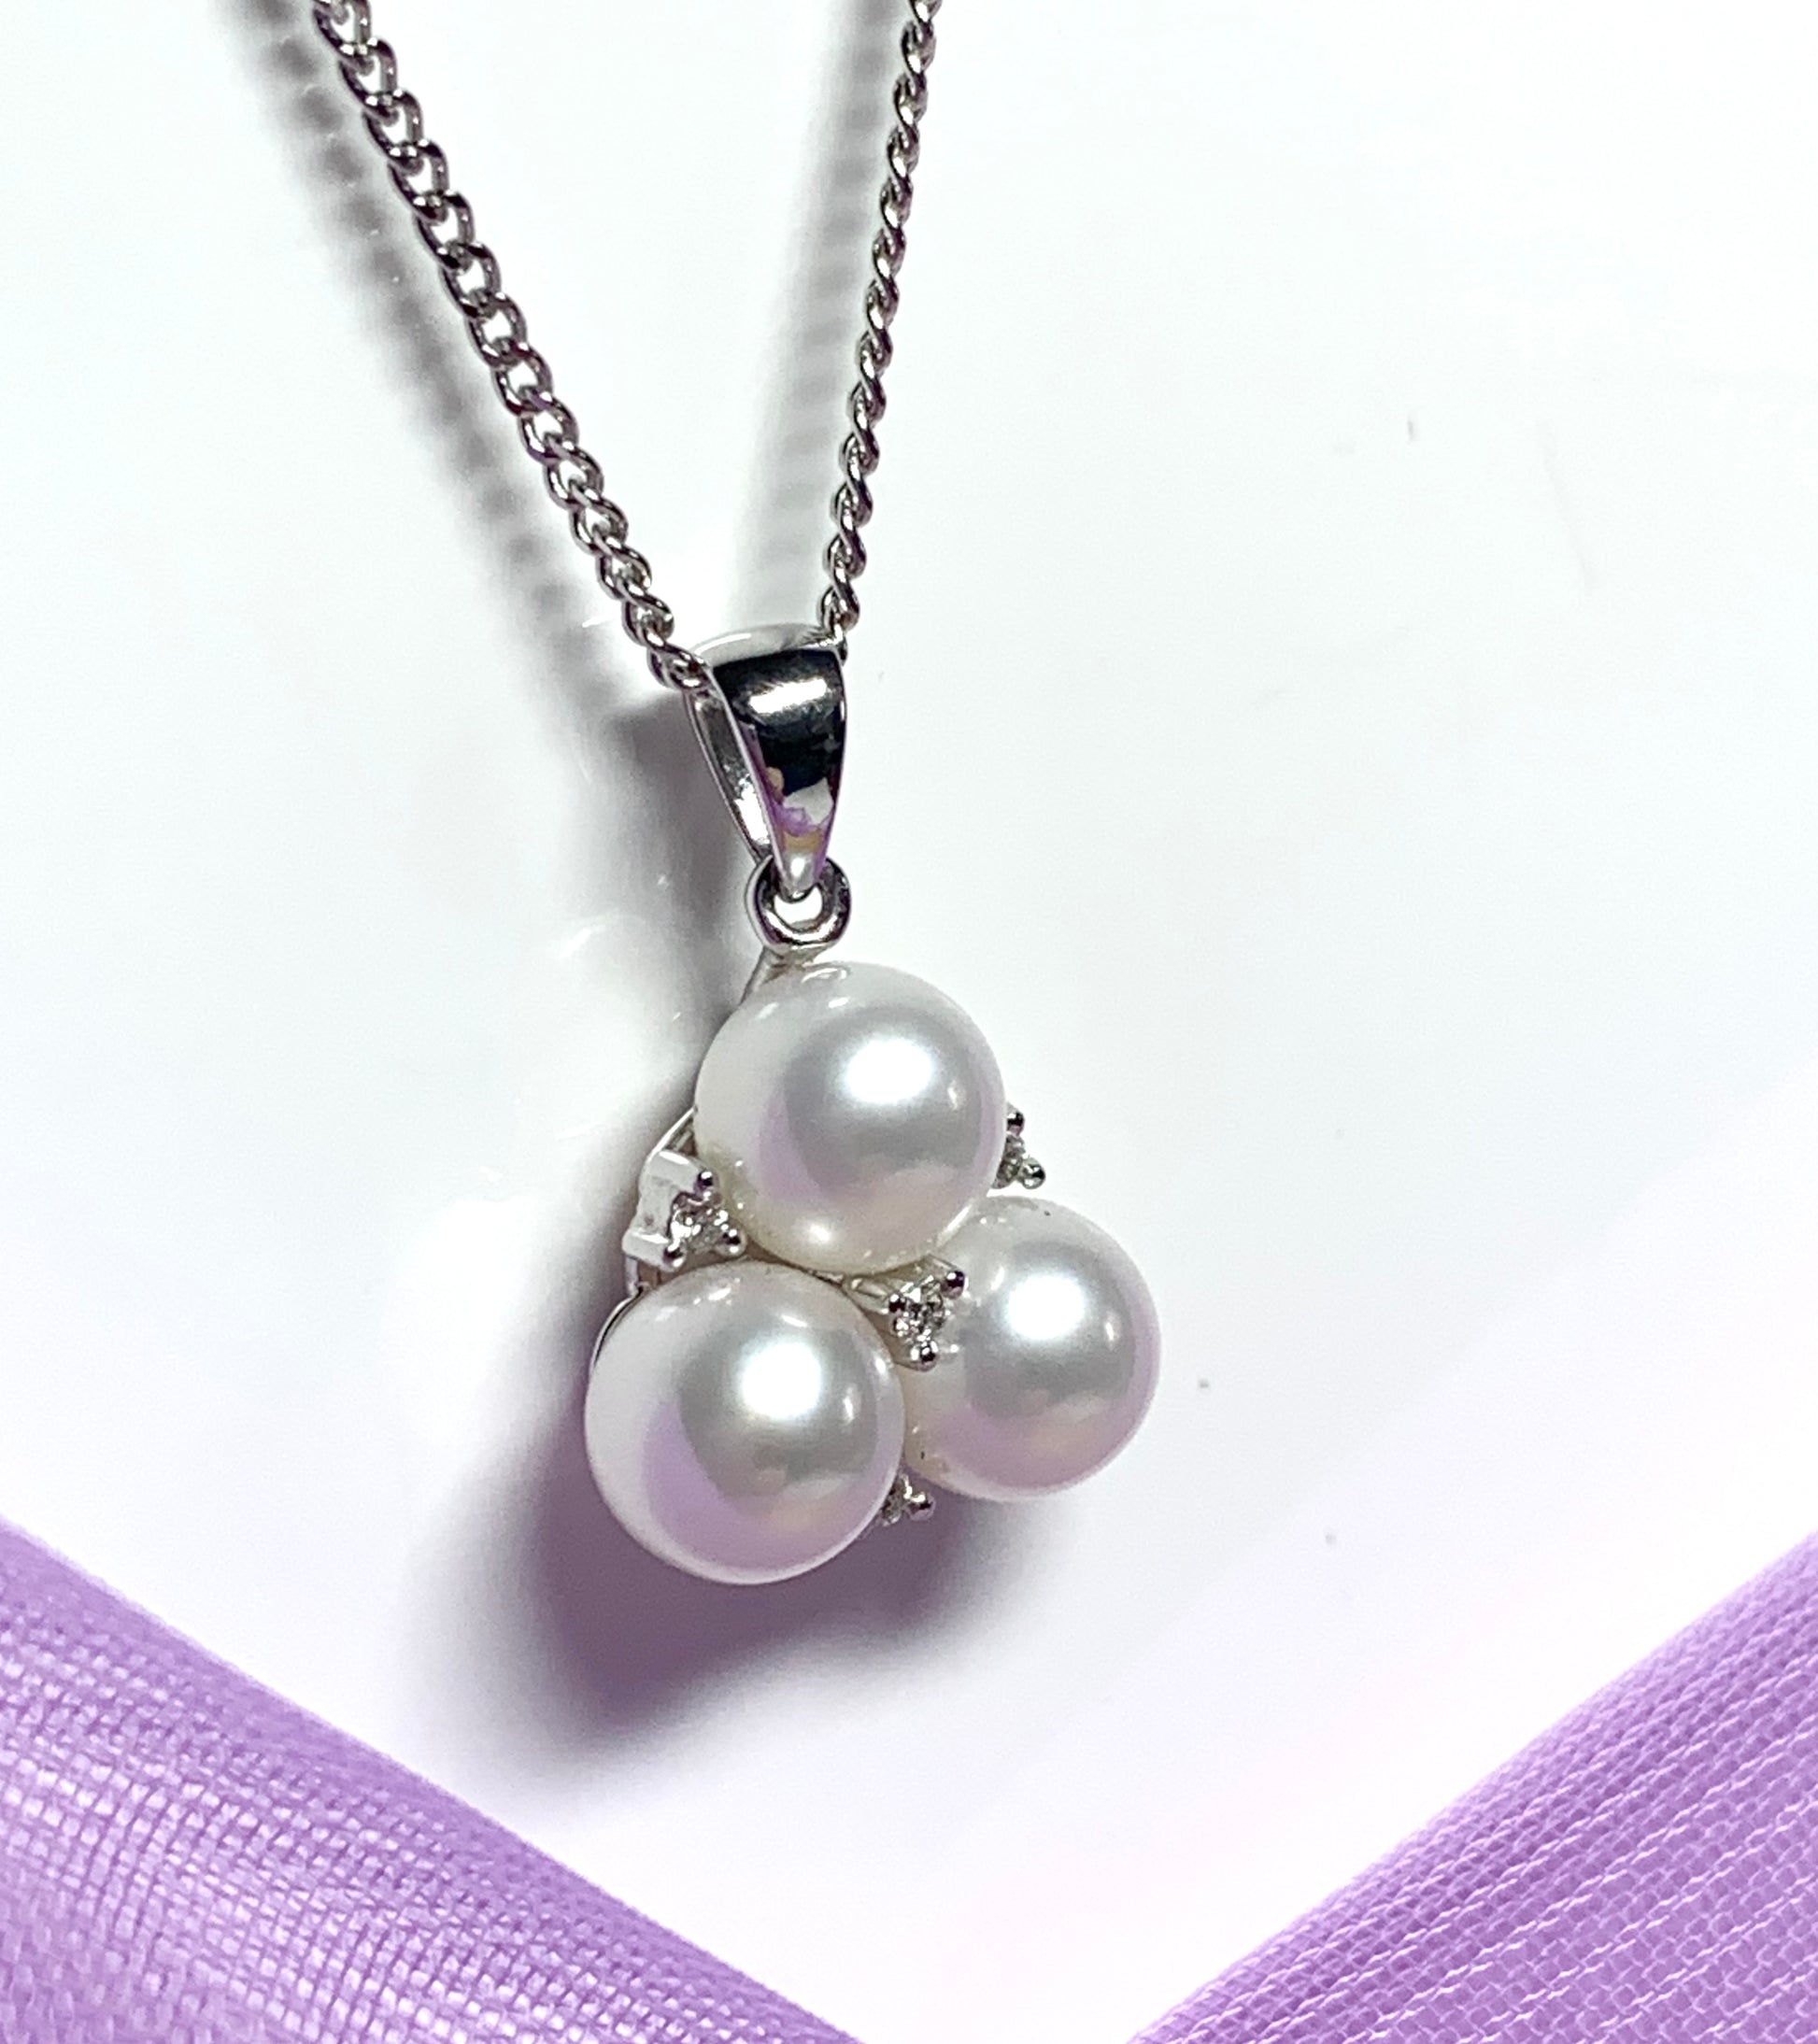 Triple cluster real pearl necklace and diamond cultured freshwater white gold pendant